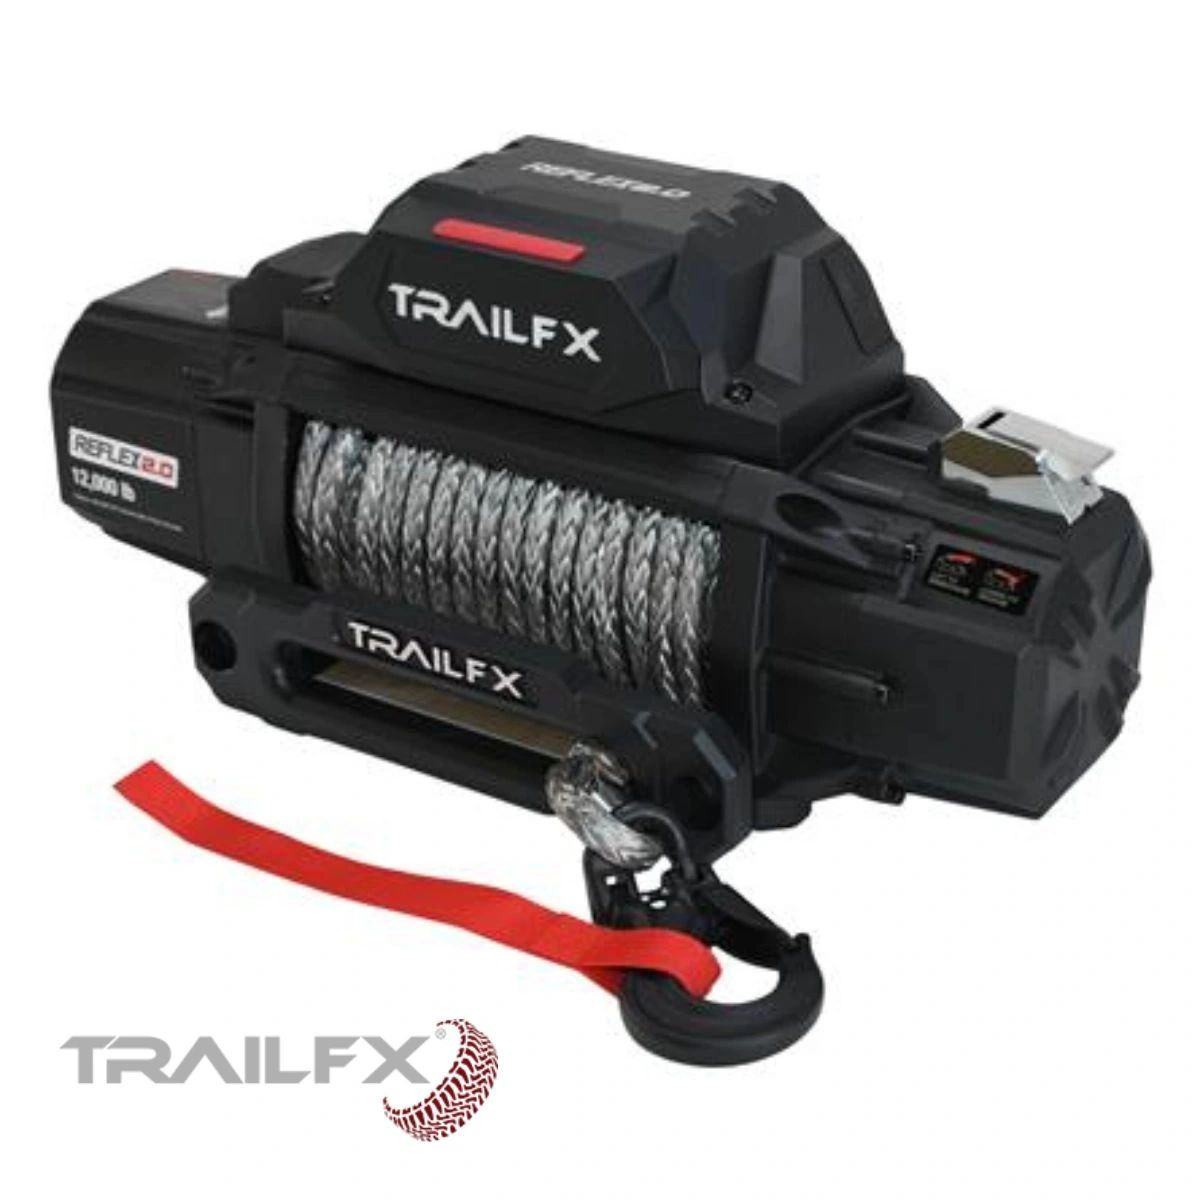 TrailFX’s Reflex 2.0 12000-pound winch provides the power and performance needed to overcome off-road or work challenges.
Visit us to be properly equipped for your adventures with TrailFX’s Reflex 2.0 Winch.